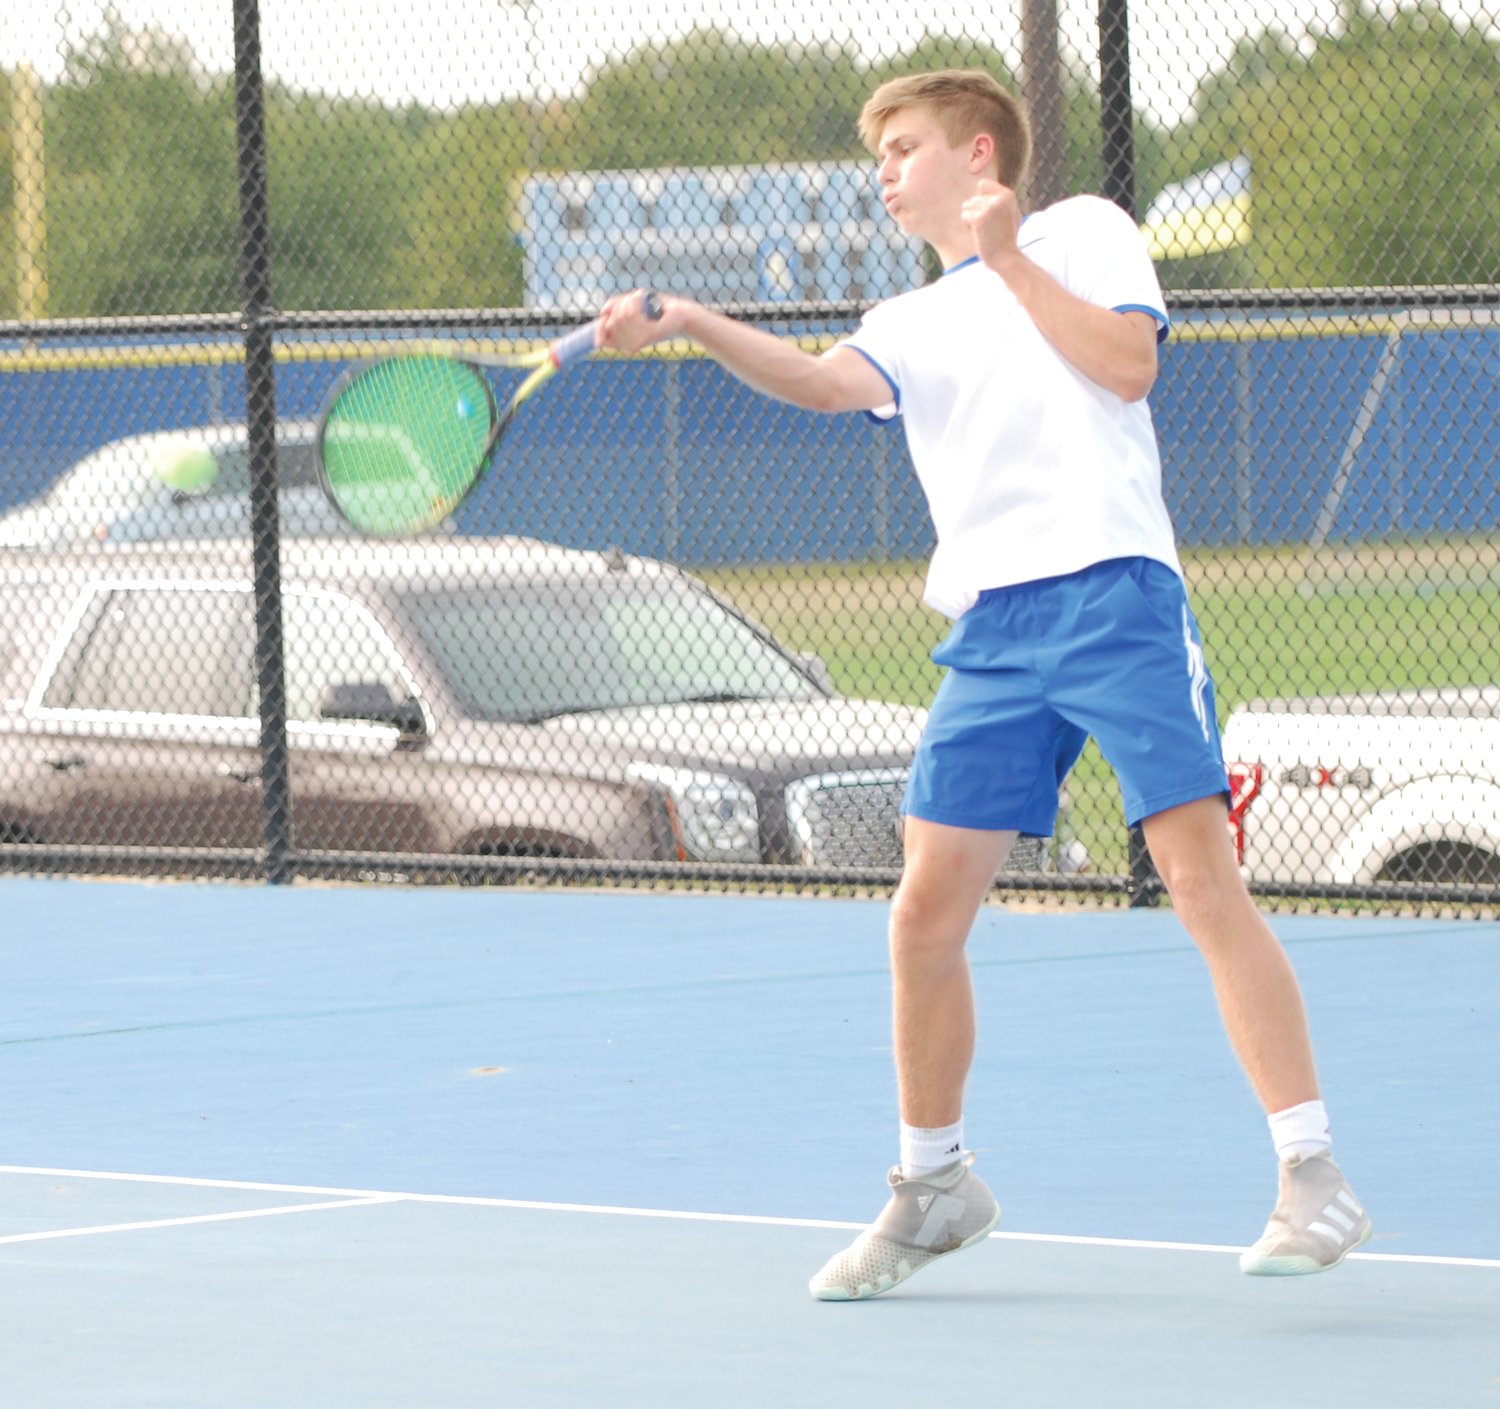 Crawfordsville's Thatcher Gambrel defeated Hunter Kashon 6-0, 6-0 at No. 2 singles on Monday.